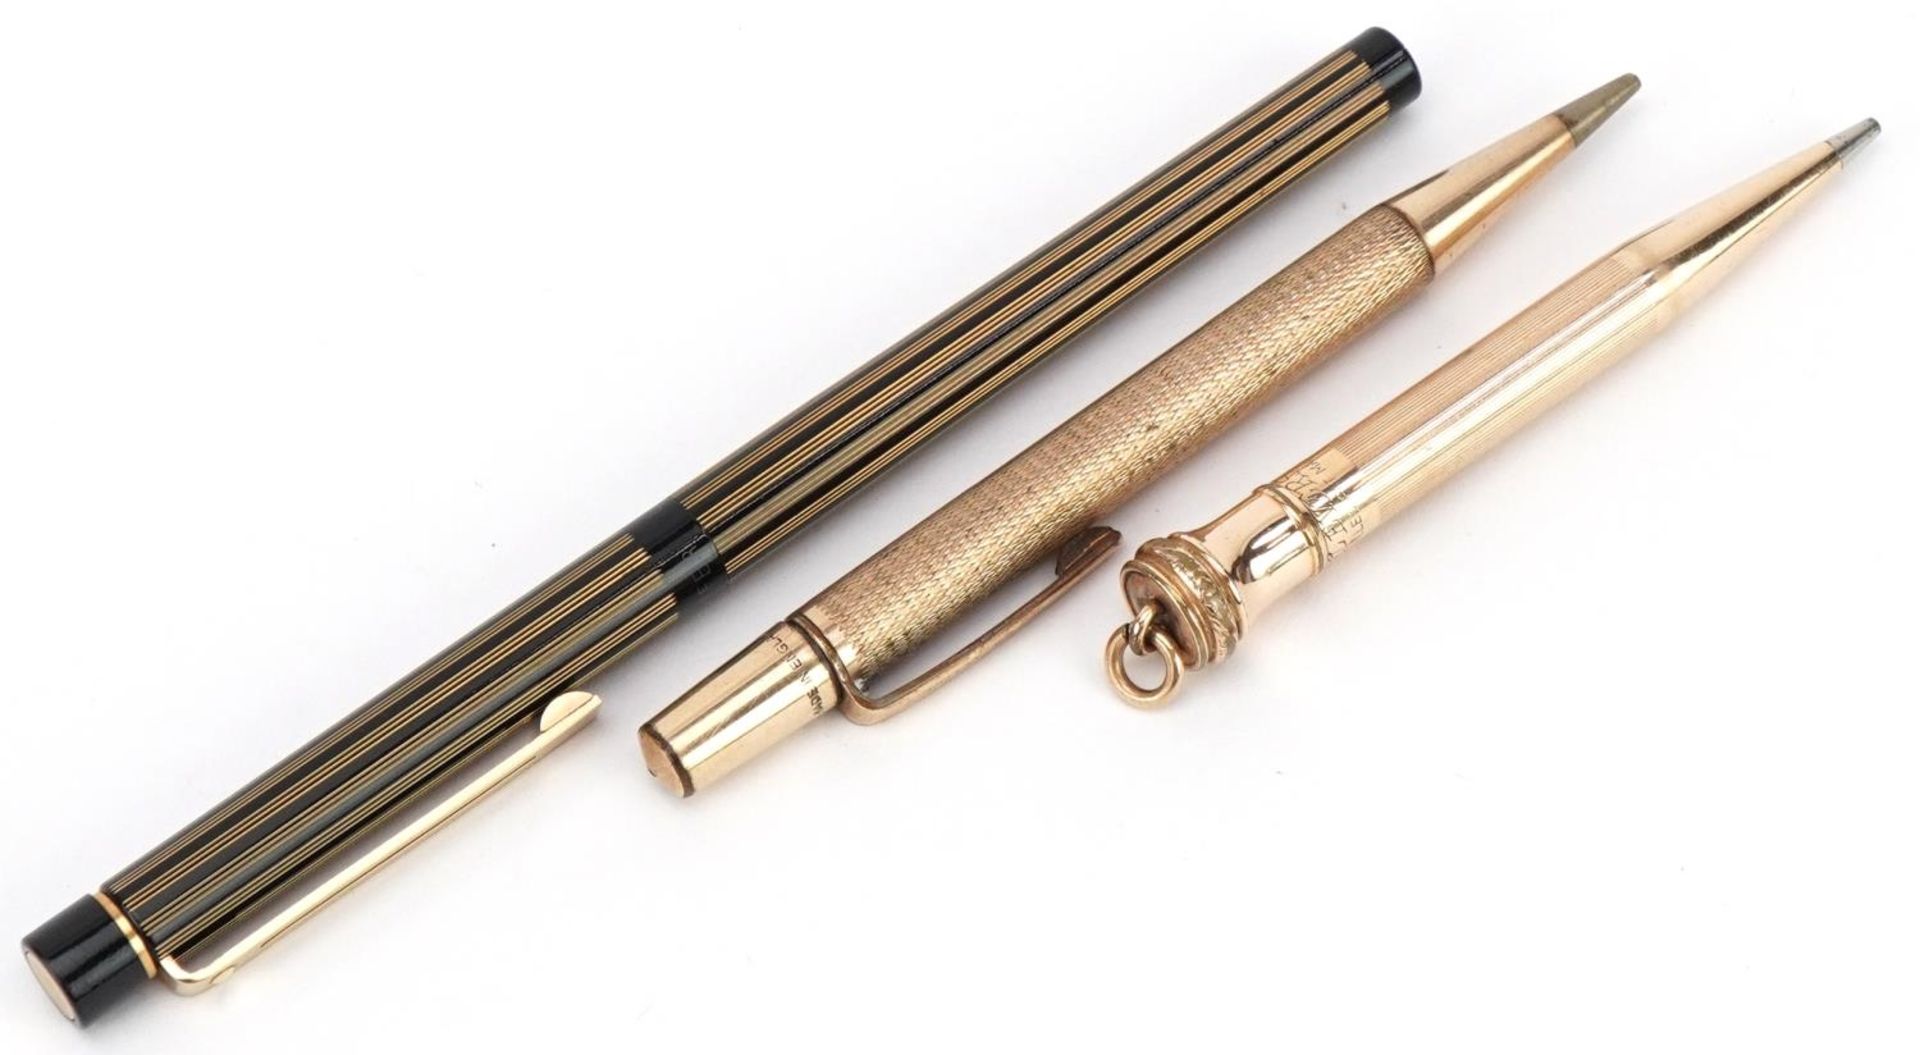 Sheaffer fountain pen with 14k gold nib and two gold plated propelling pencils : For further - Image 6 of 6